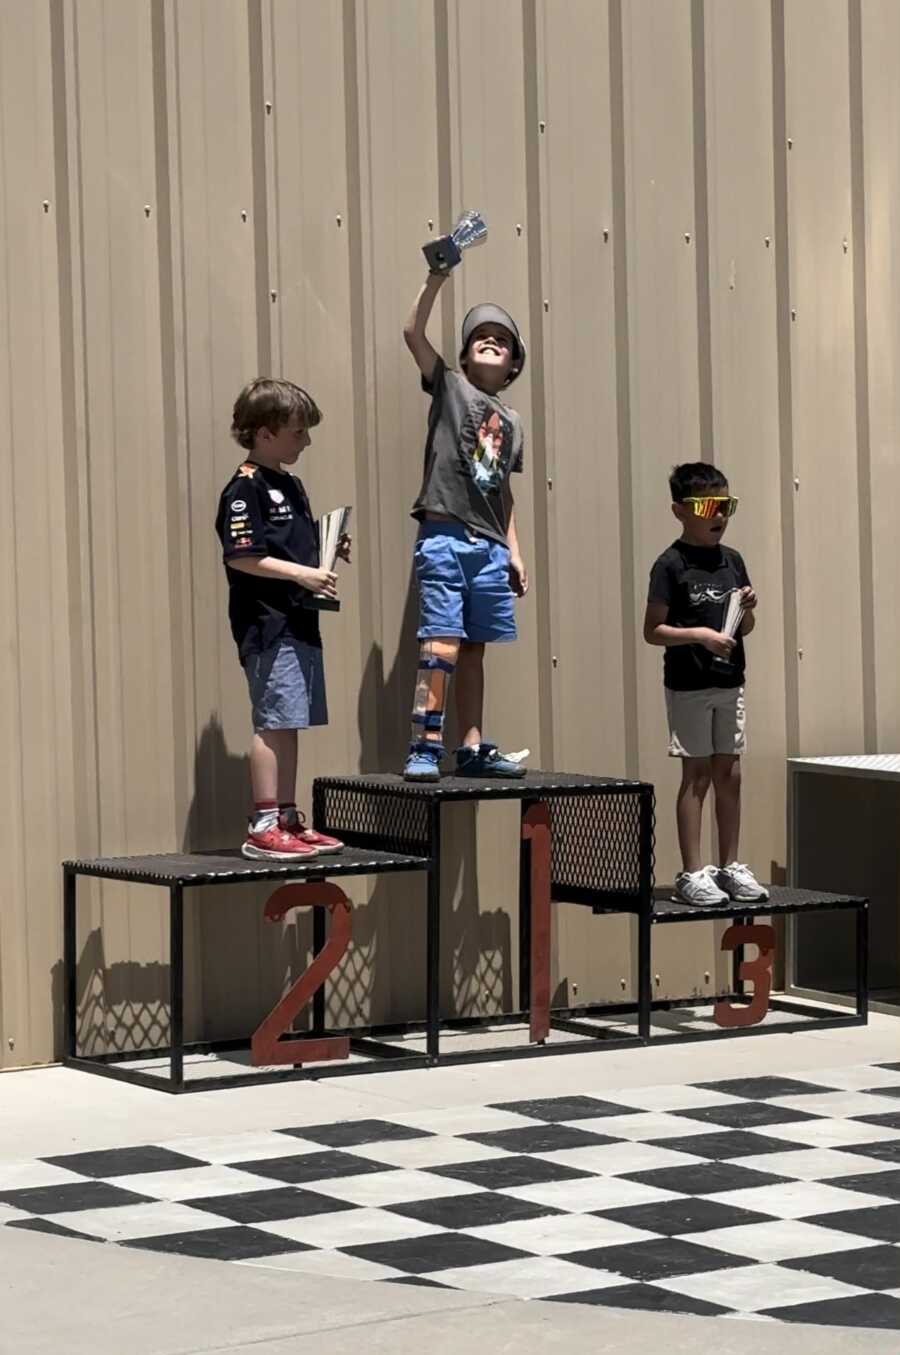 Boy standing on podium proudly holding racing tophy